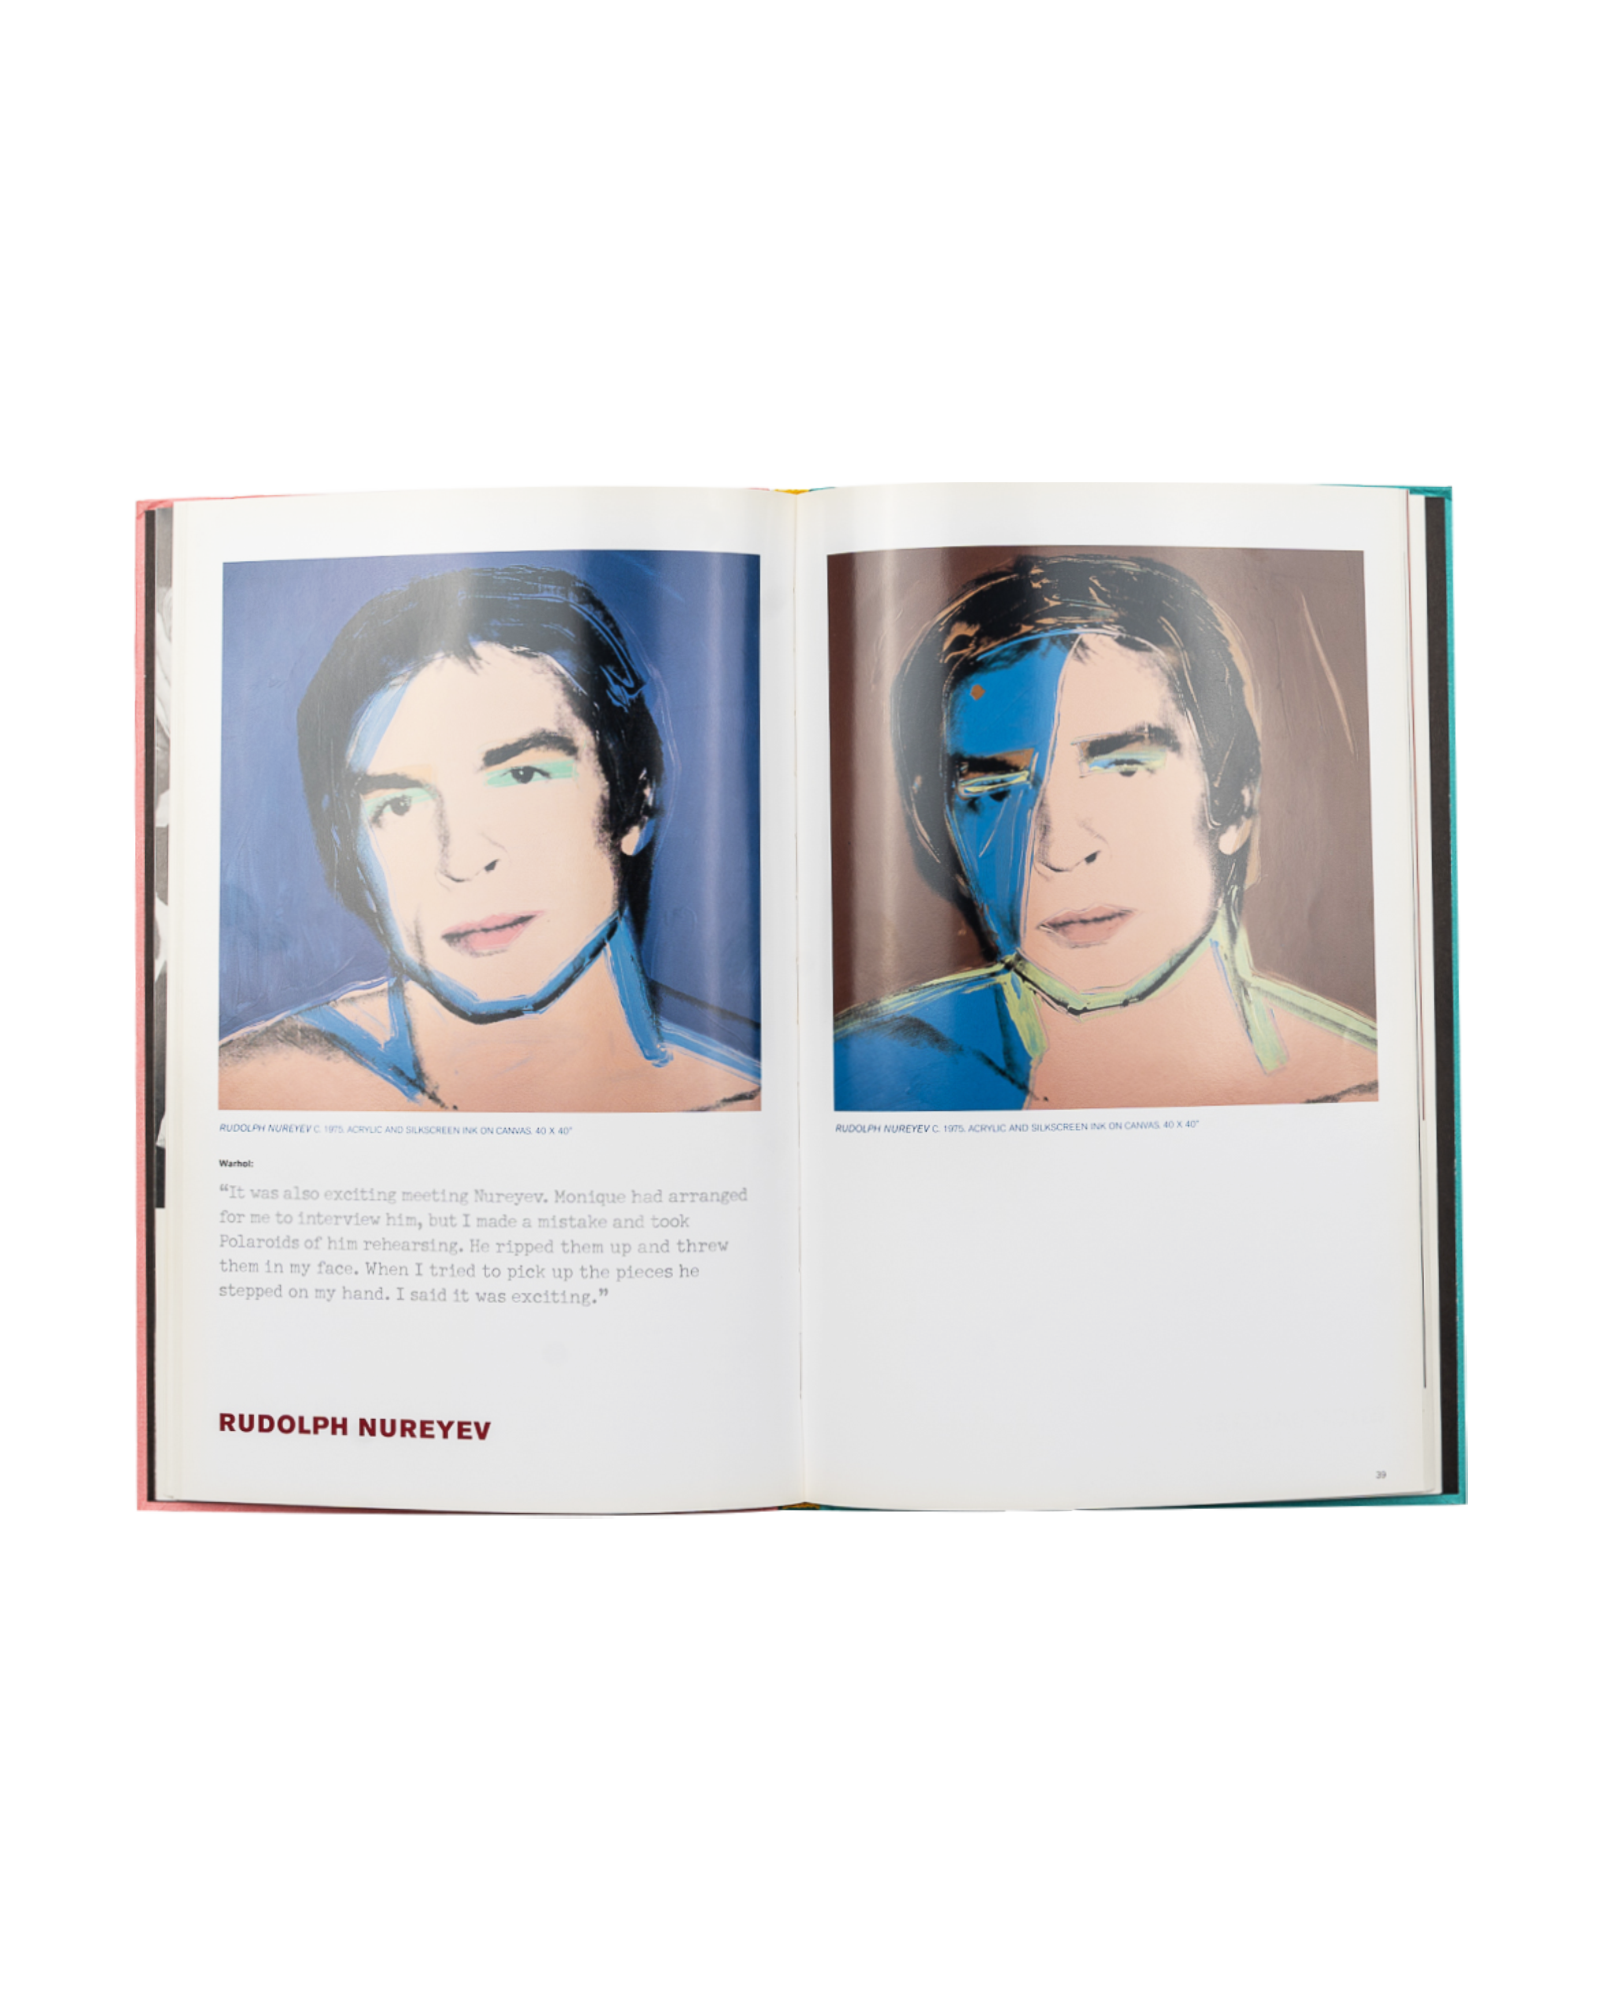 Classic Paris - Book - Andy Warhol - Celebrities: More Than Fifteen Minutes